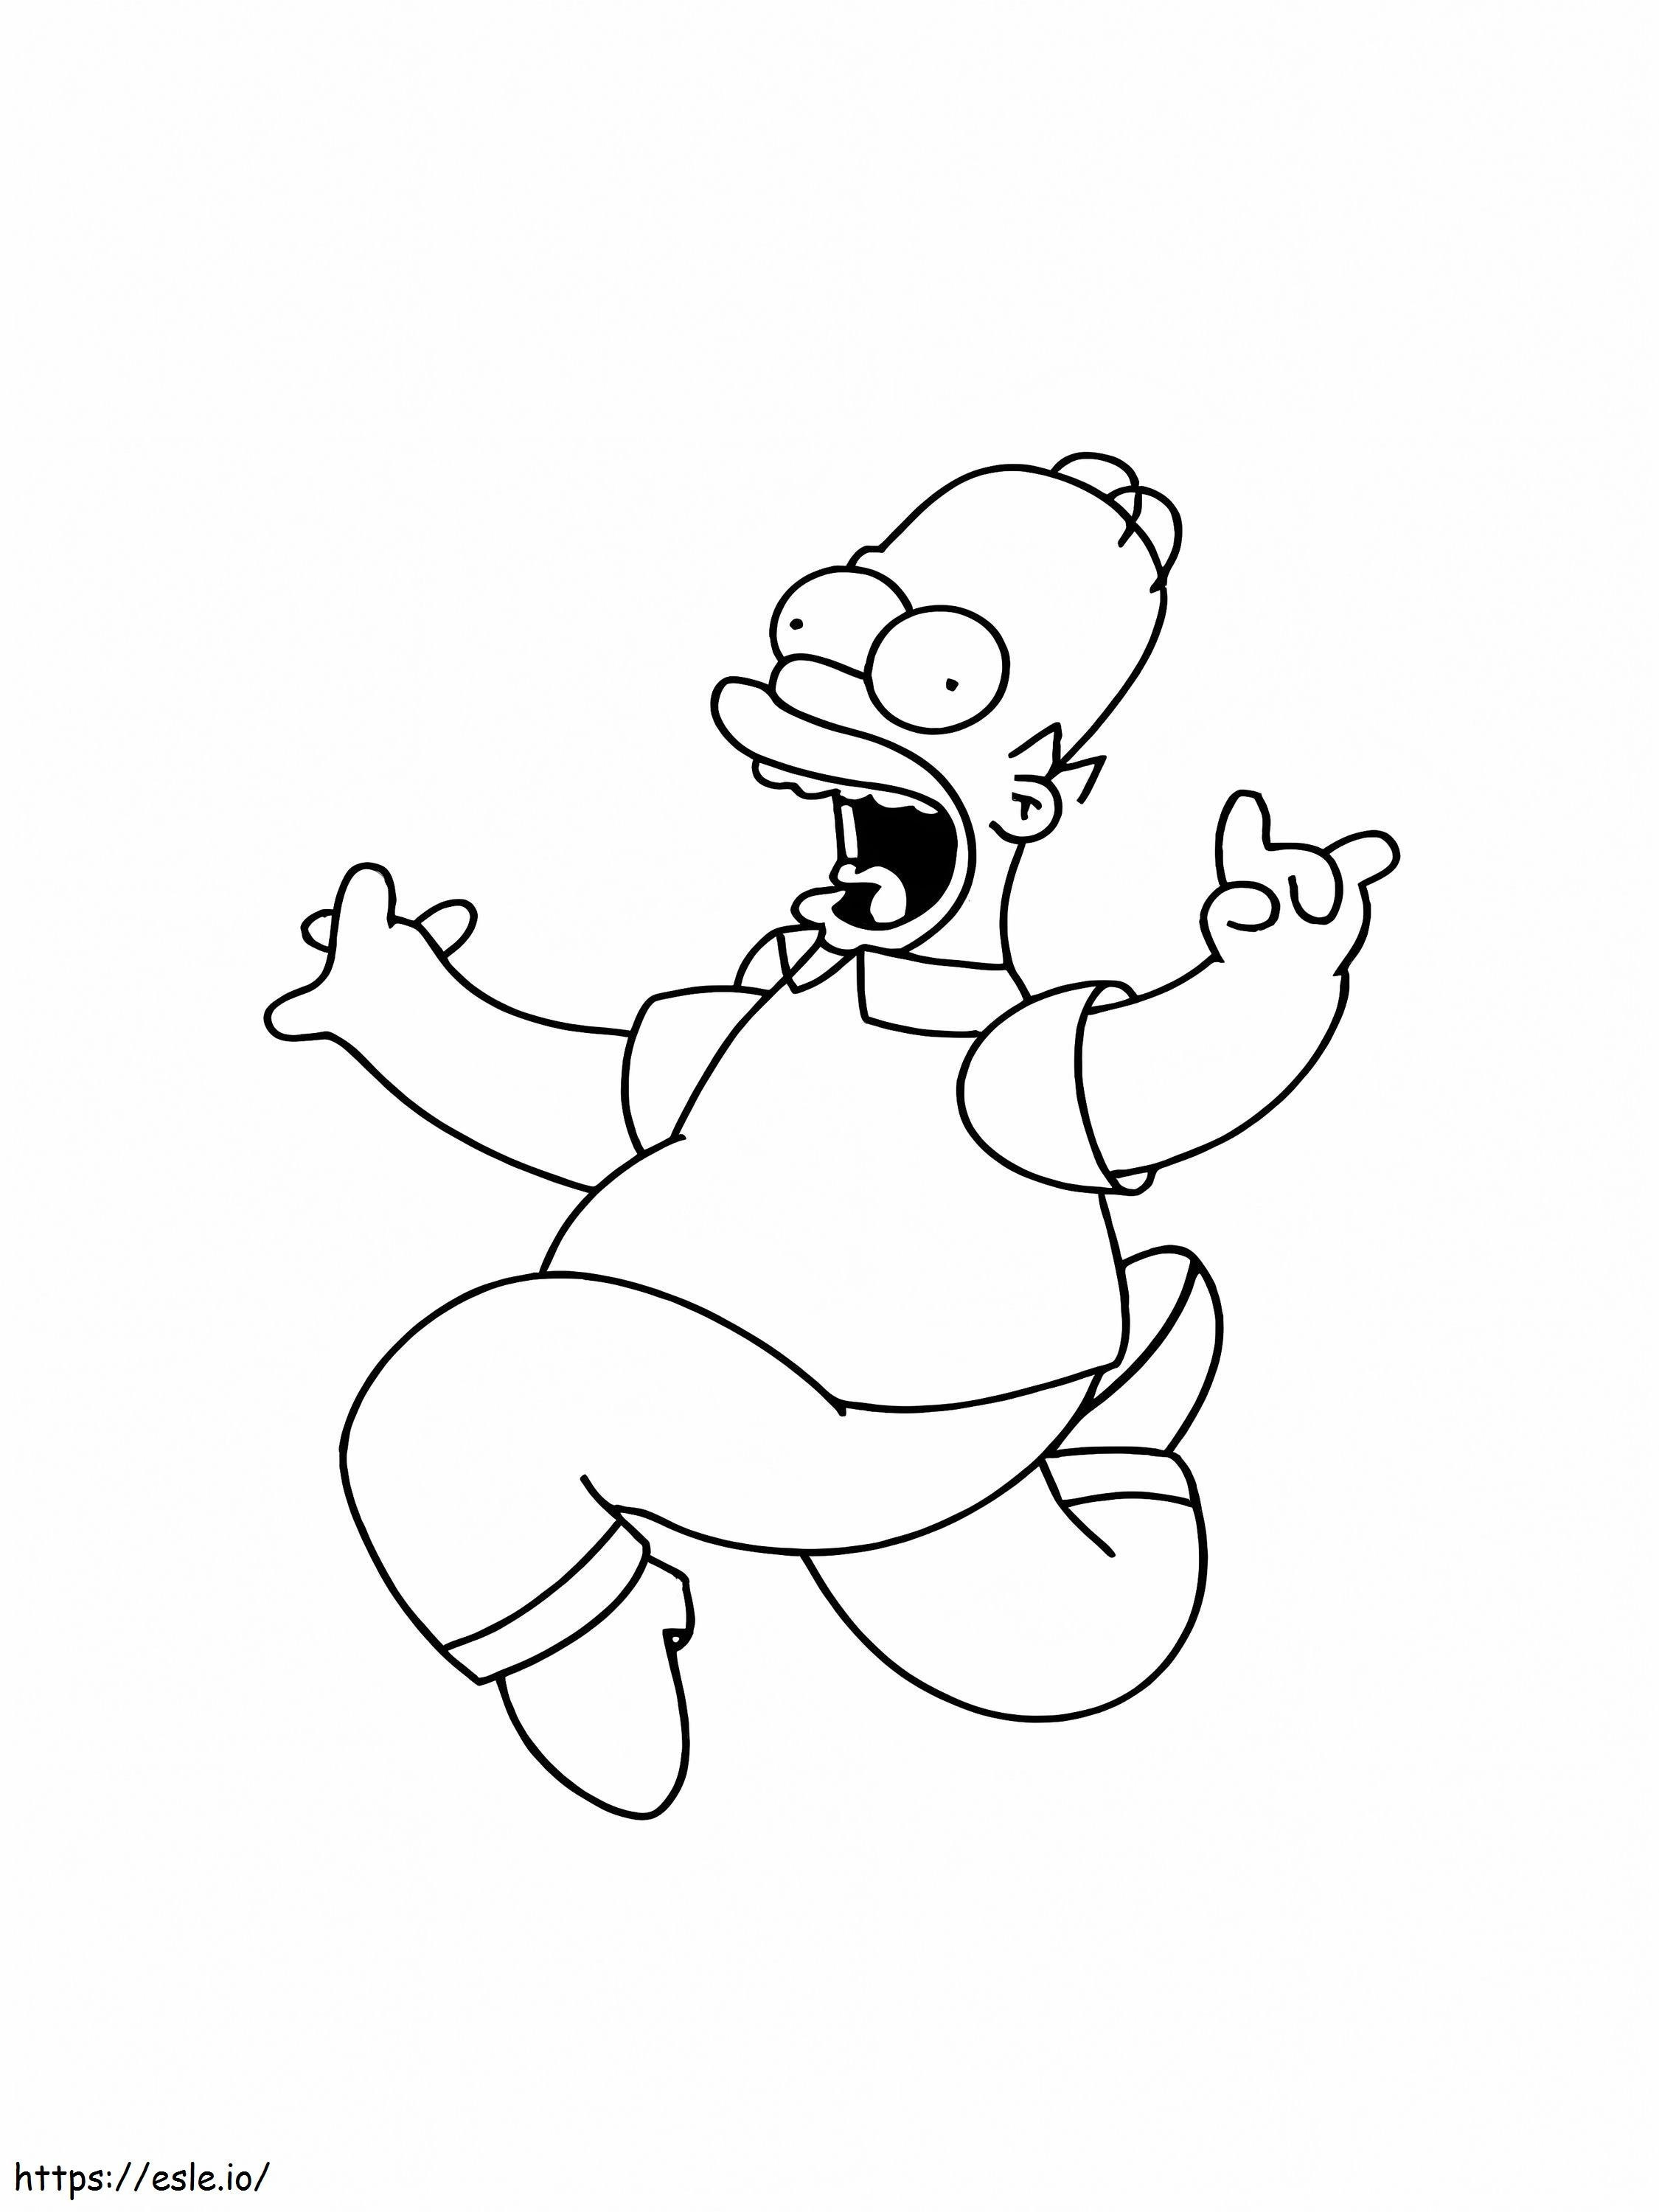 Homer Simpson Jump coloring page